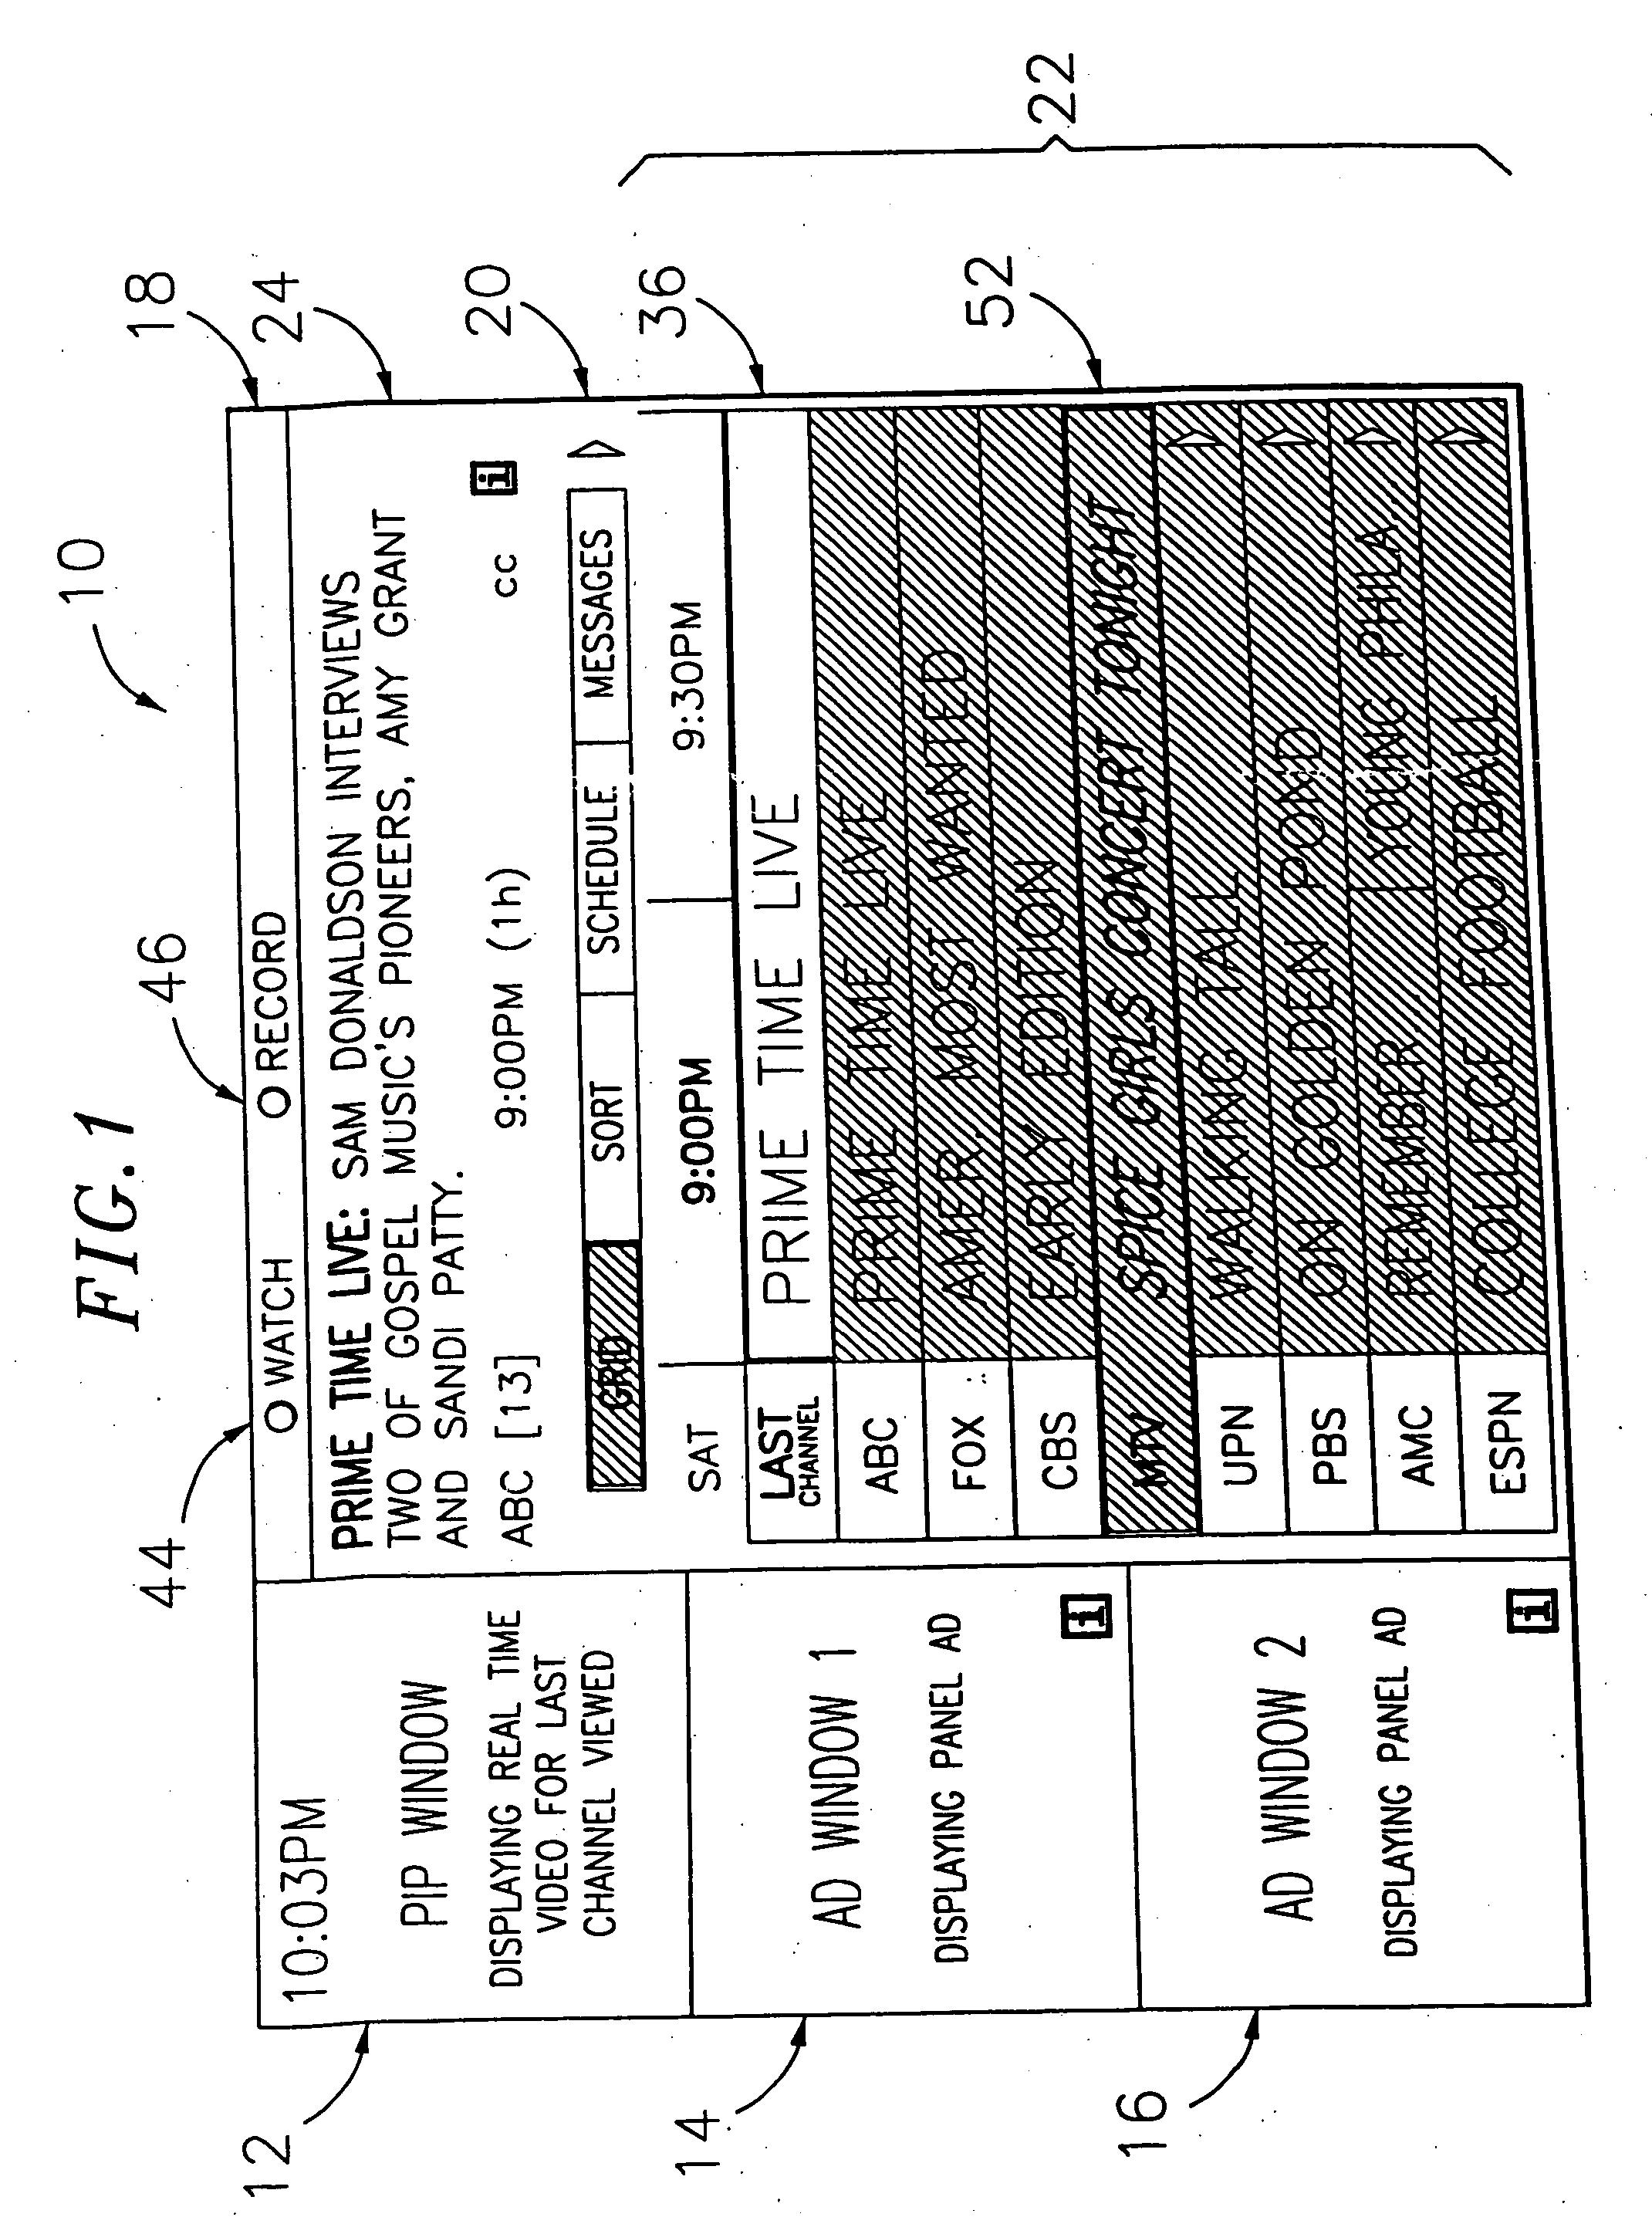 System and method for targeted advertisement display responsive to user characteristics